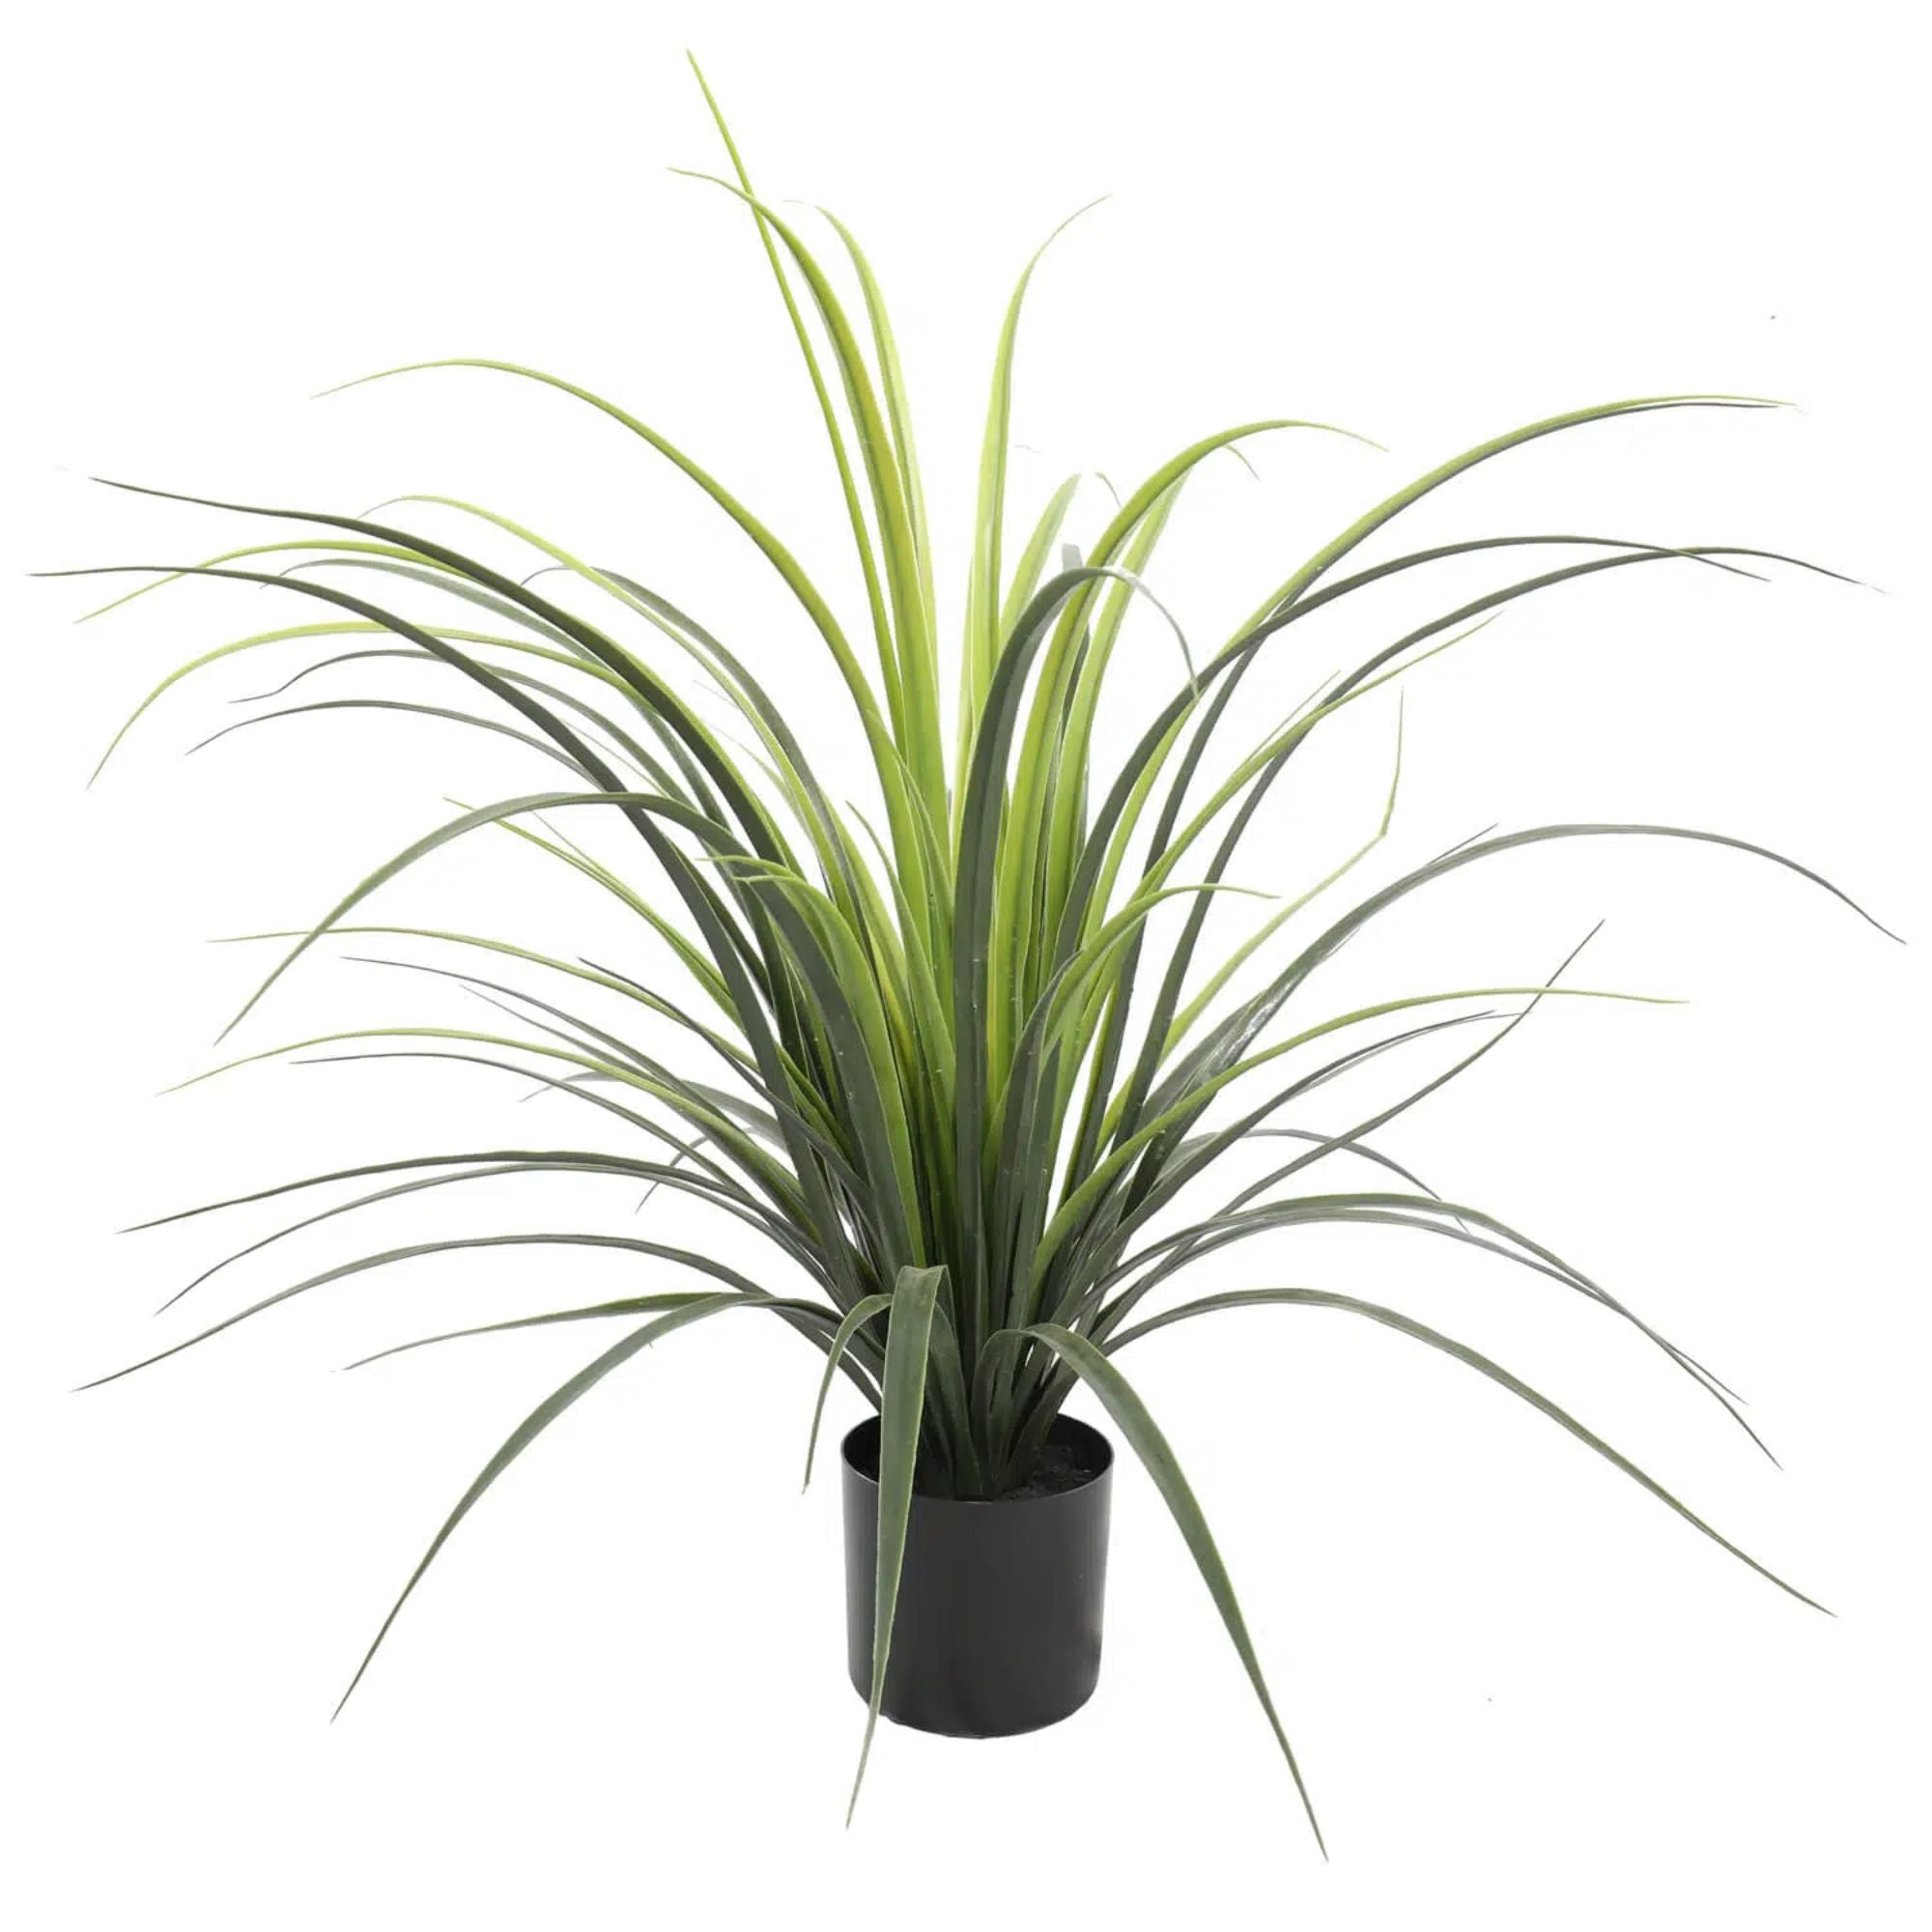 Potted Artificial Long Grass (Yucca Grass) 75cm UV Resistant